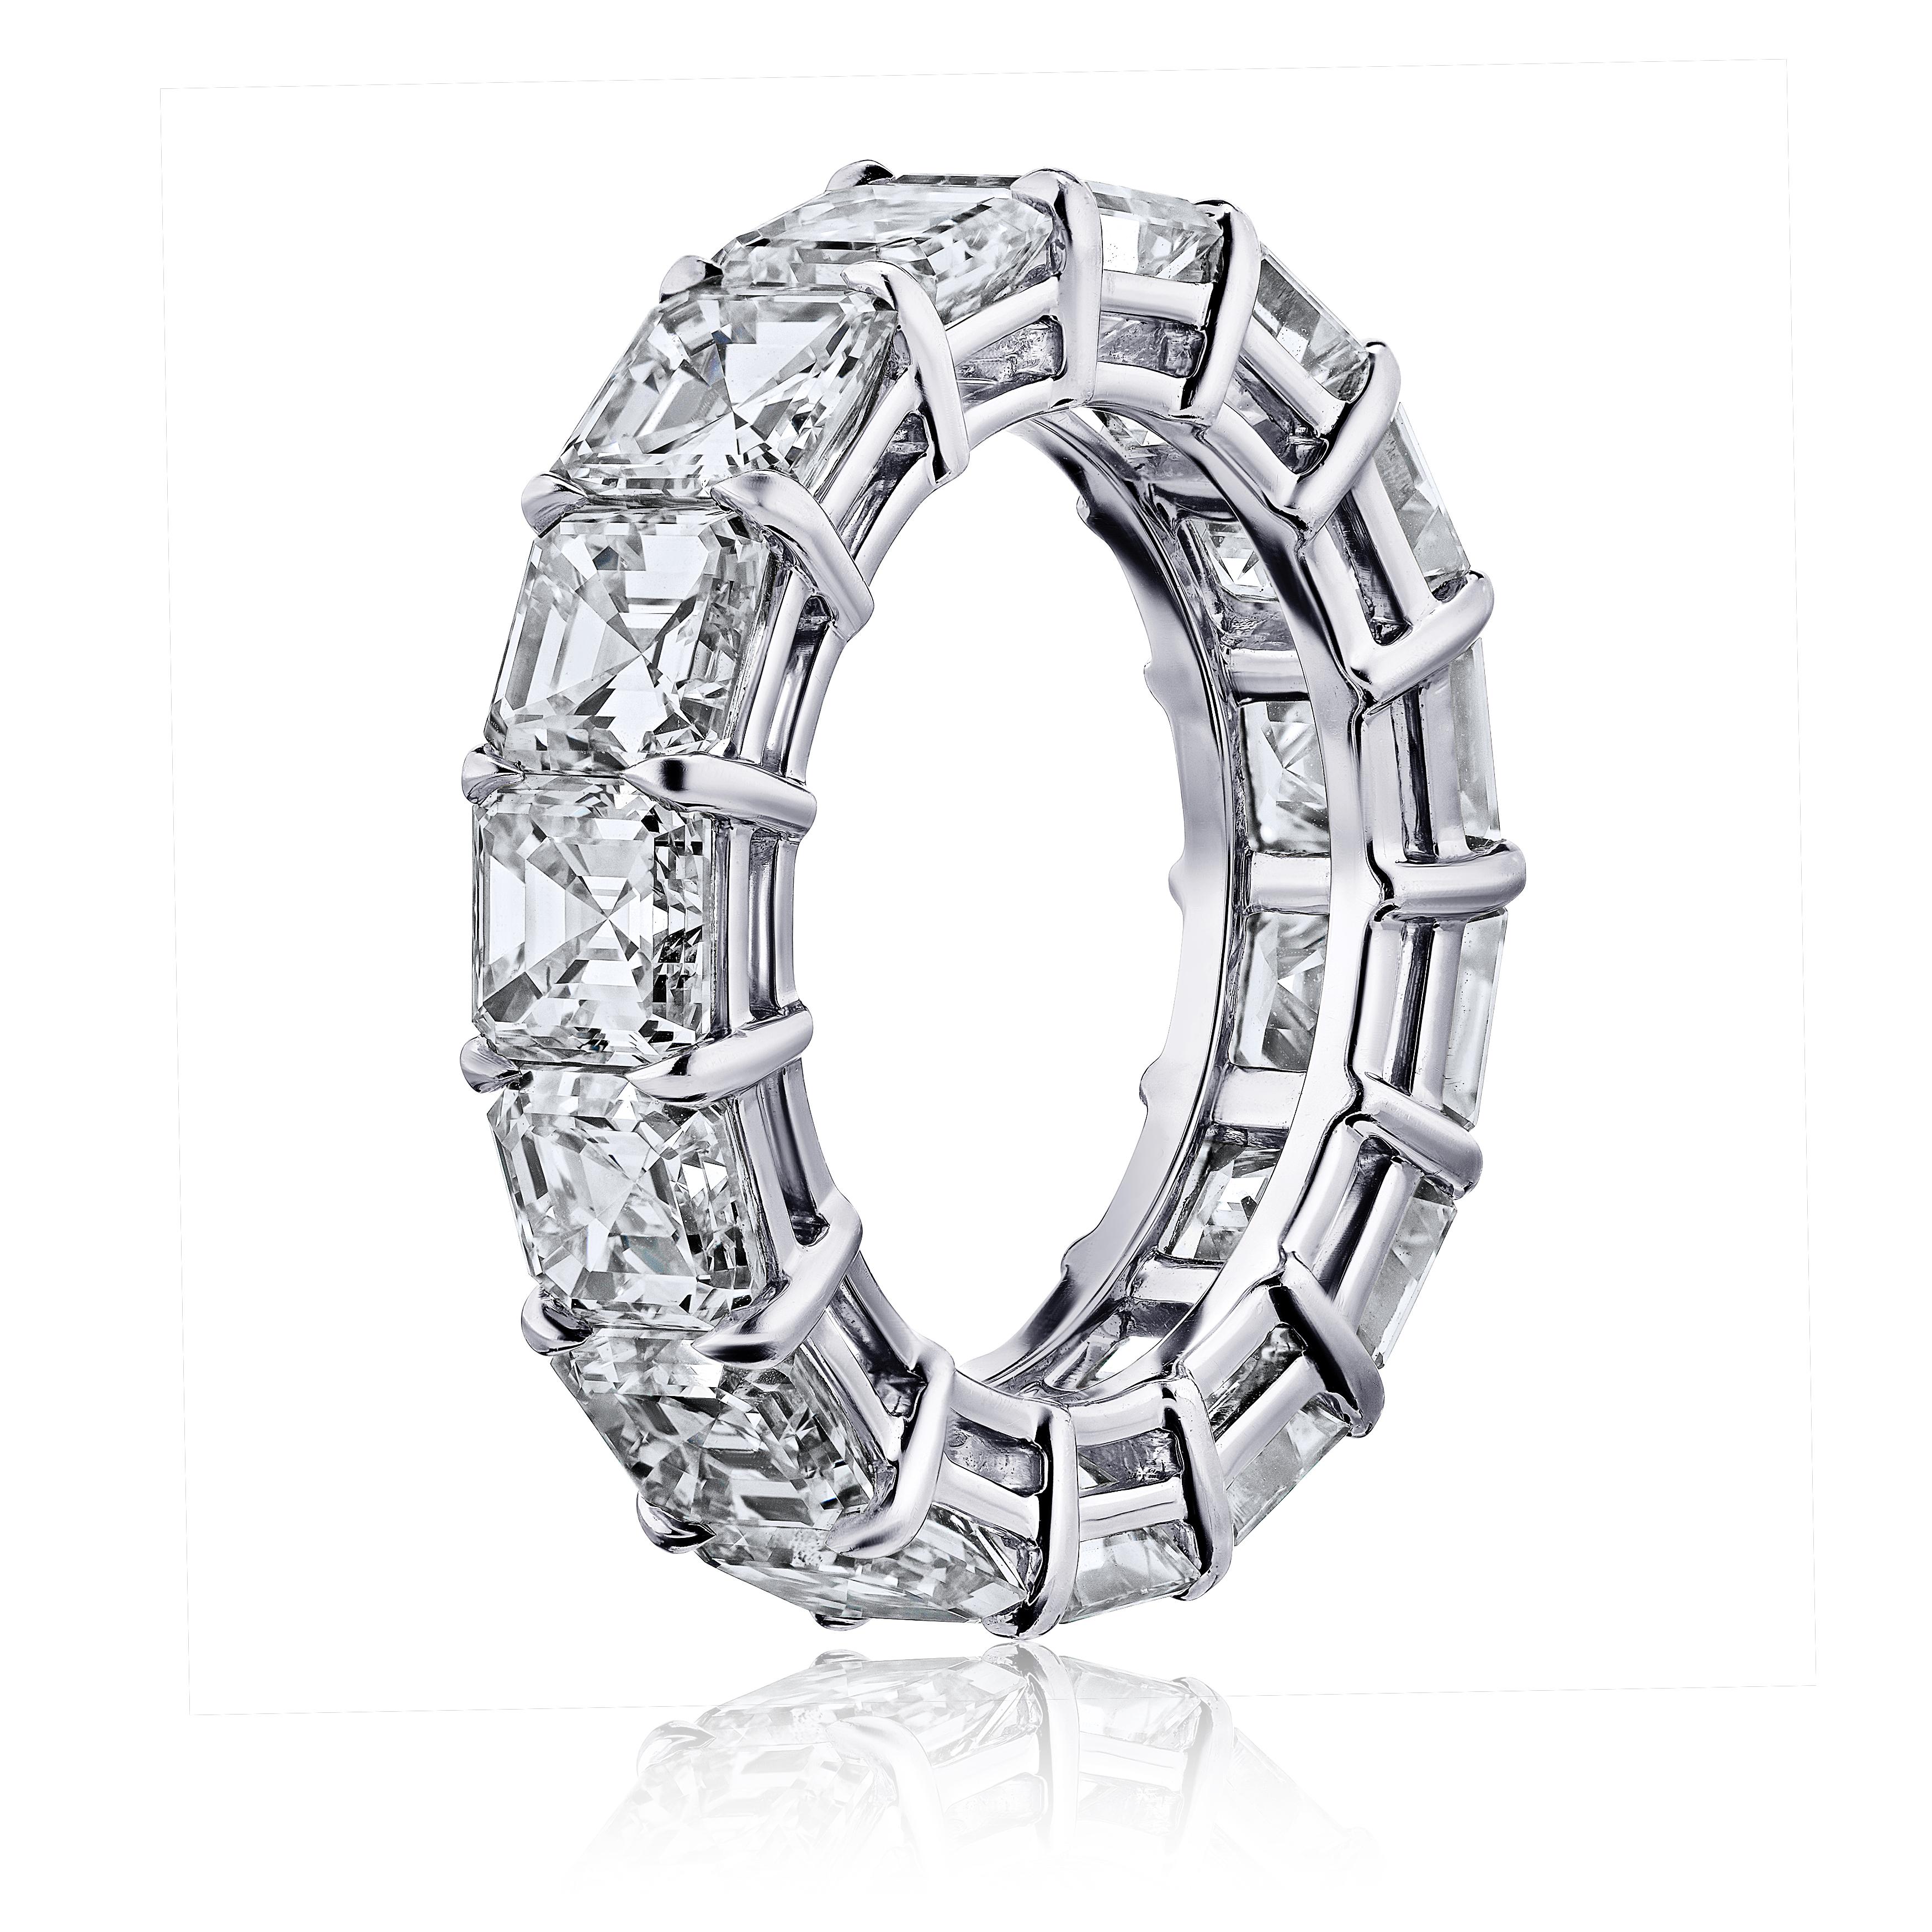 Asher Cut diamond ring platinum eternity band shared prong style with a gallery.
16 perfectly matched diamonds weighing a minimum of 6.75 cts. G.I.A certificates for each diamond . Ranging from D-F in color . VVS1-VS2 in clarity . Finger size 7.